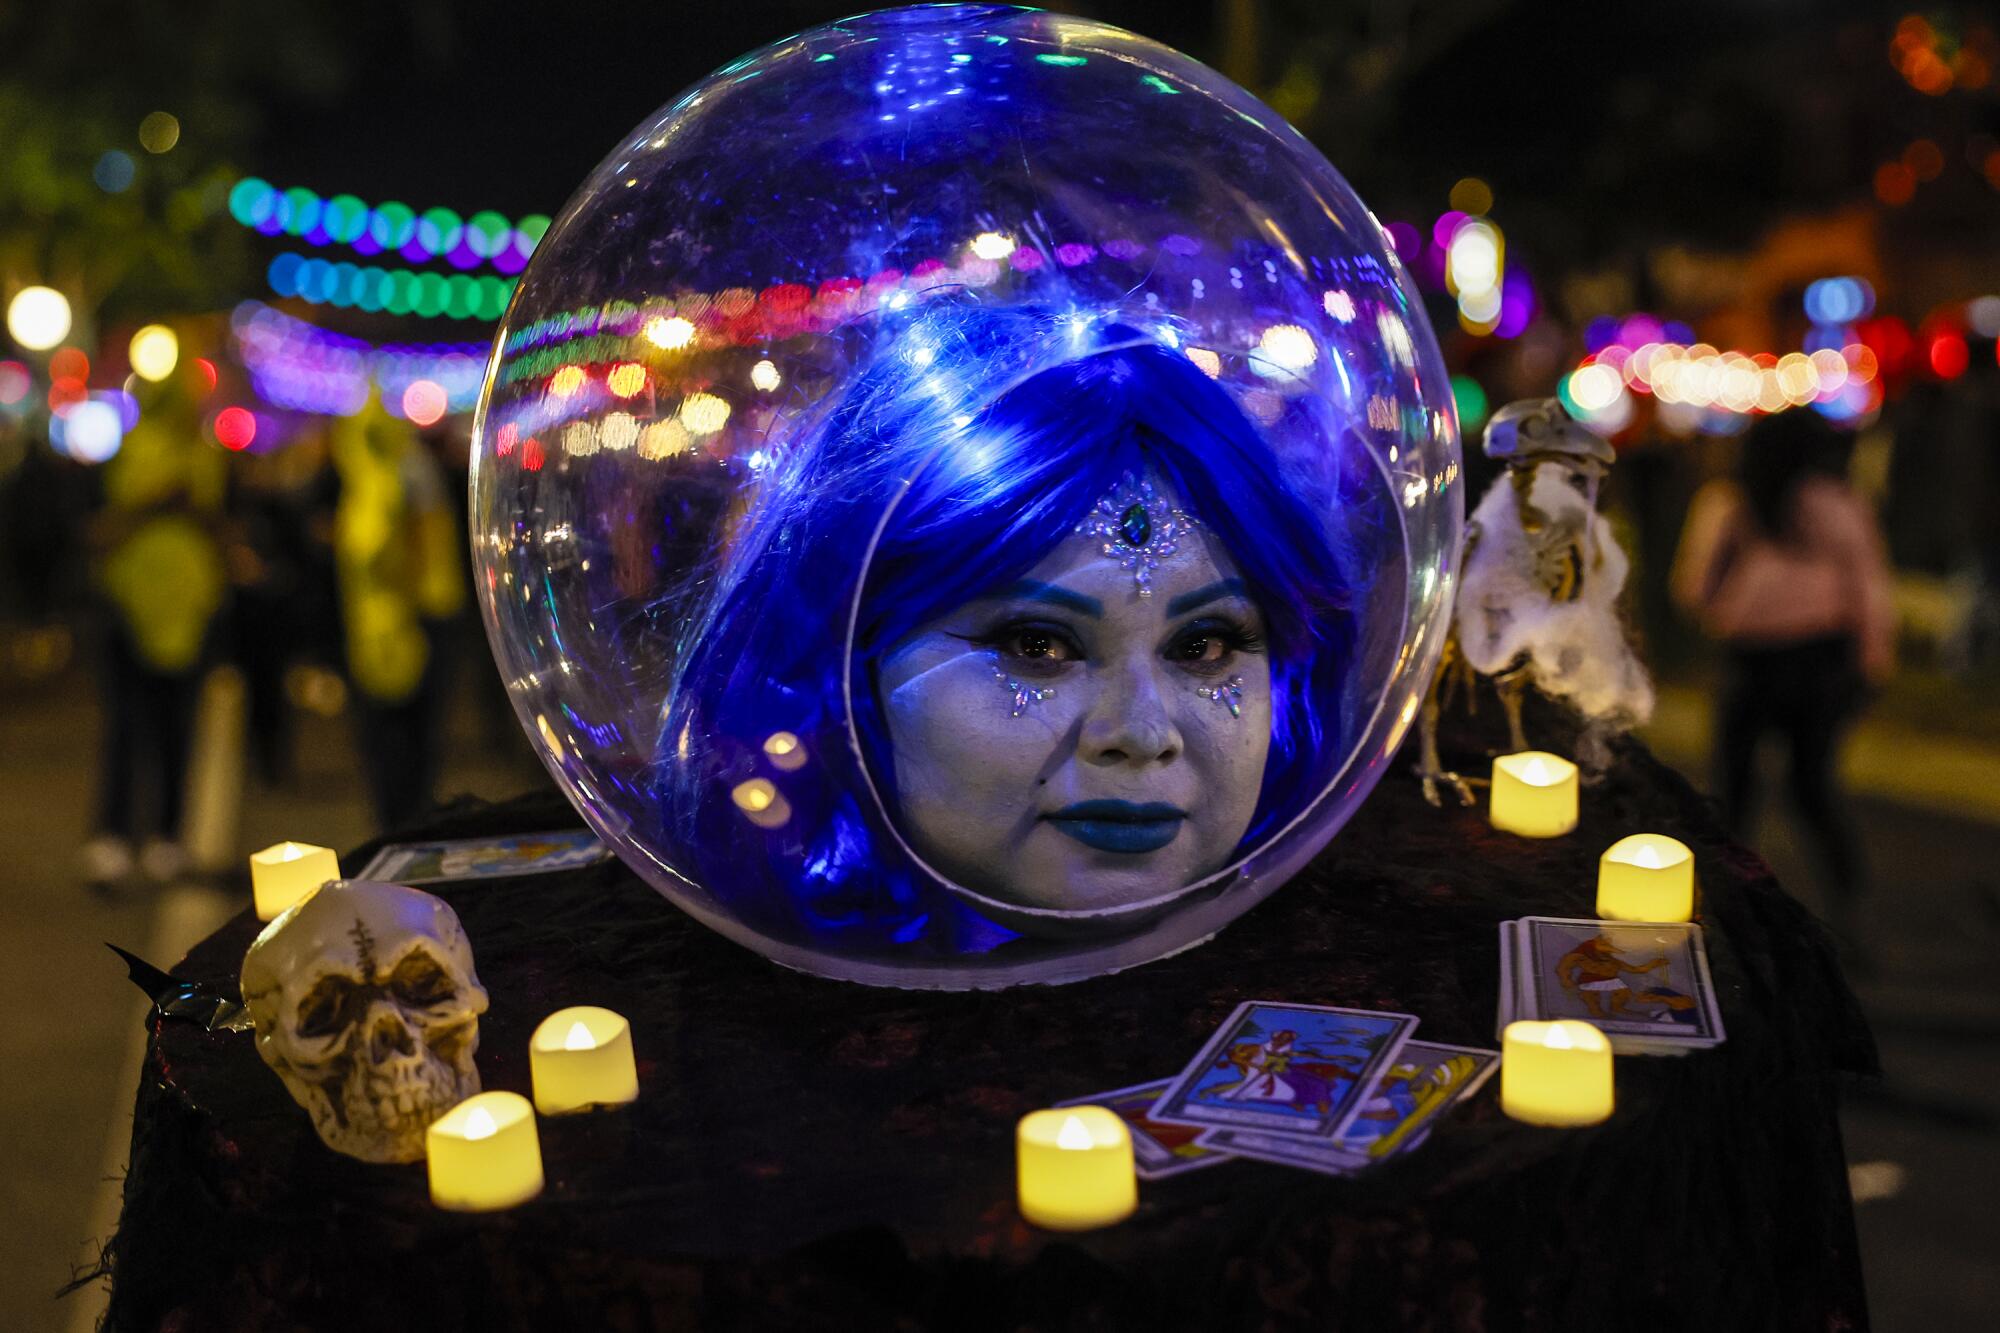 Daisy Cobos dressed as "Madame Leota," the witch from Disneyland's Haunted Mansion ride.   